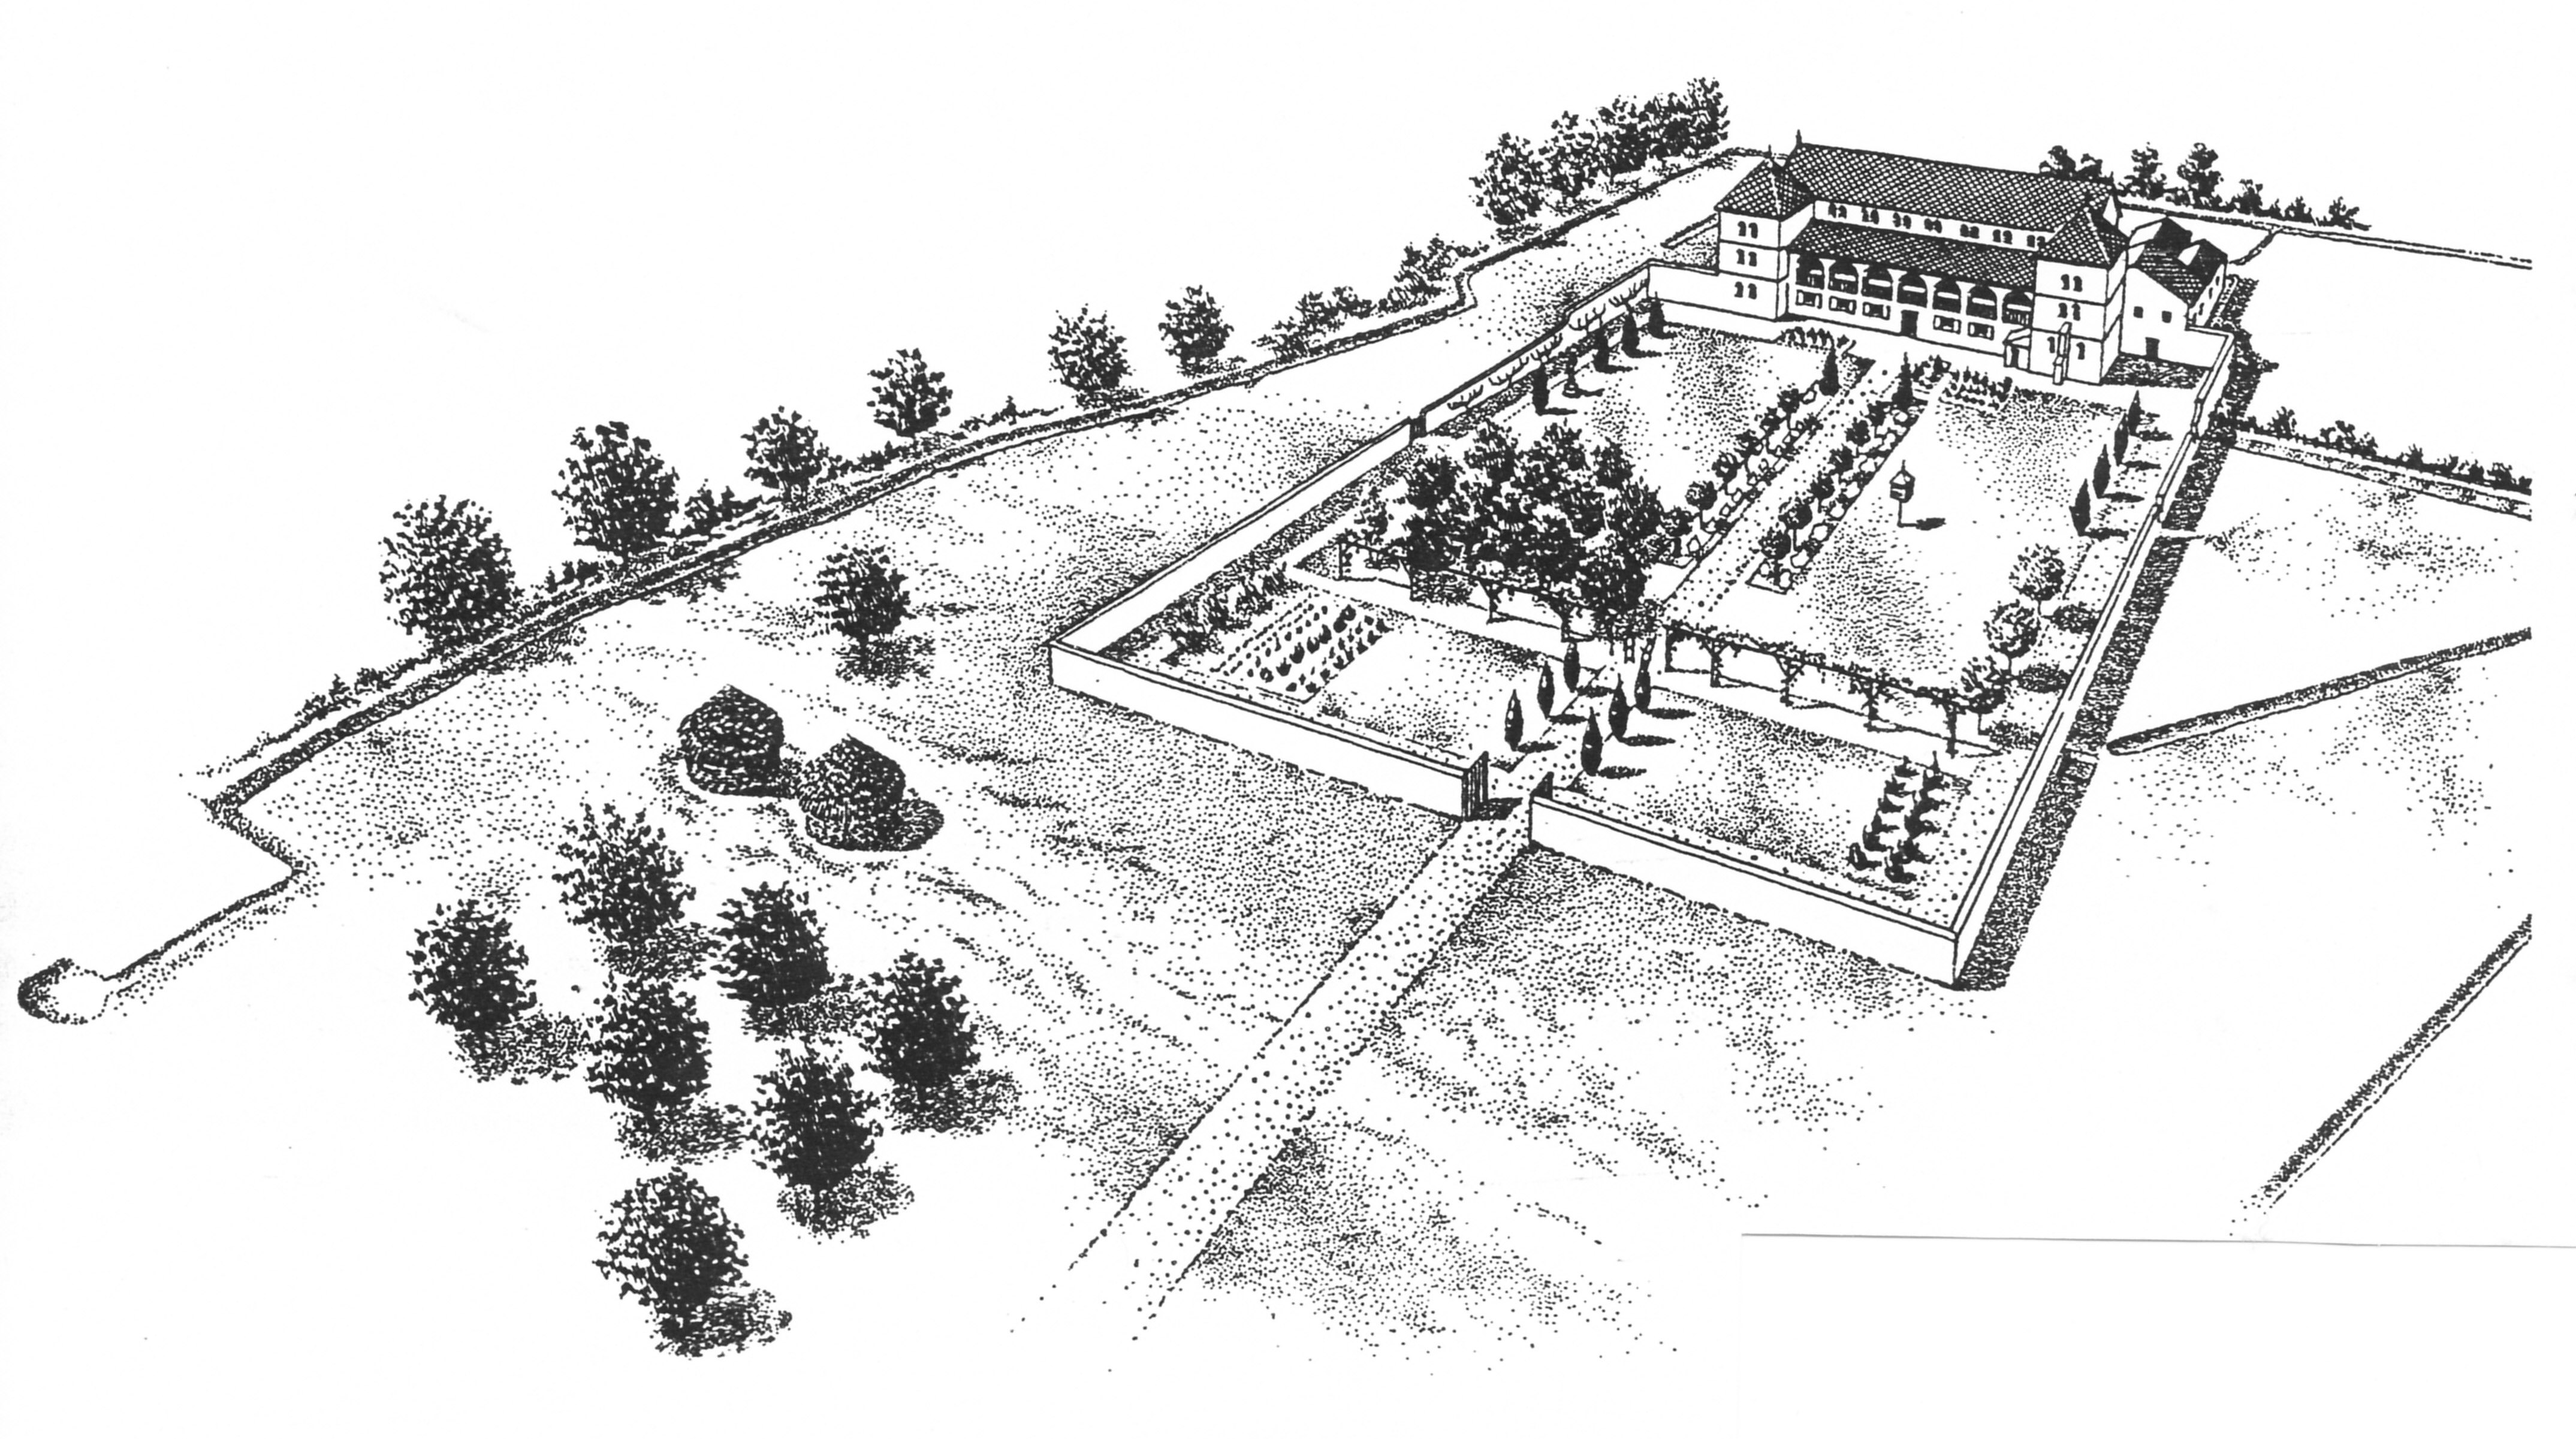 Fig. 2: Reconstruction of the villa and its garden at Frocester Court. The closest wall should be a fence. Drawing courtesy of E. Price.